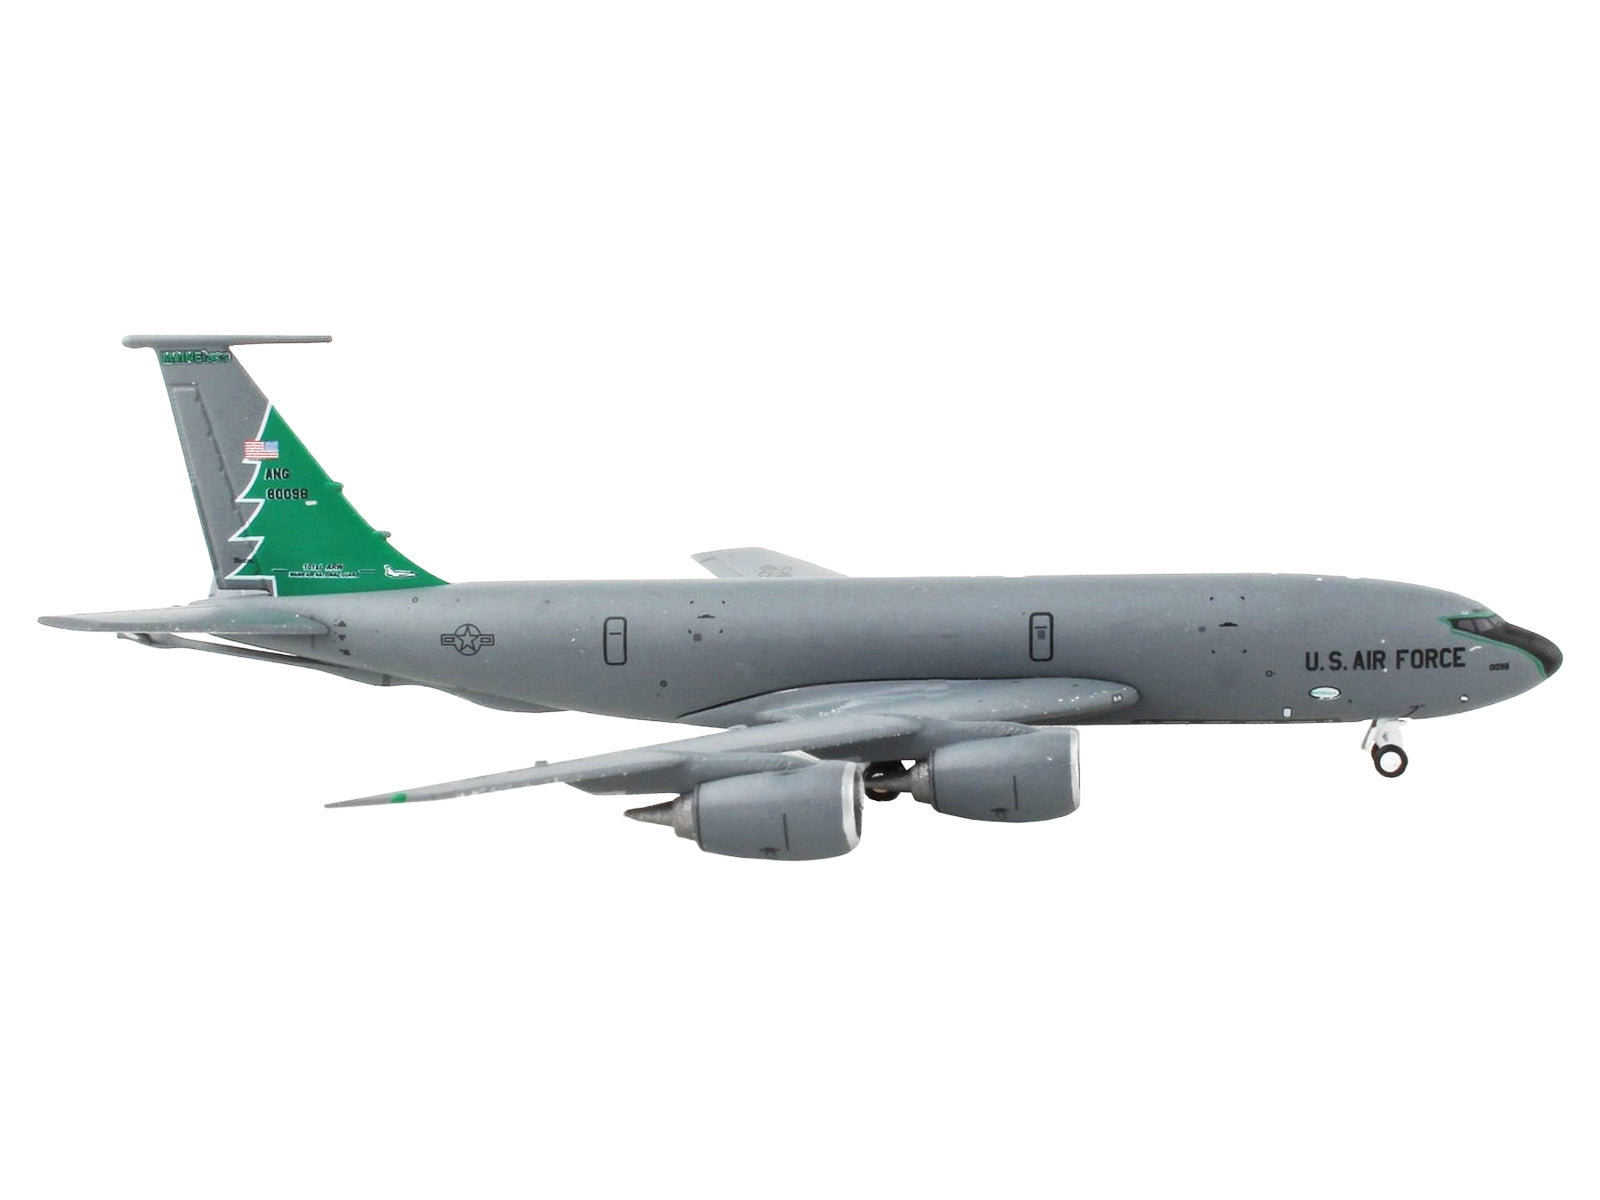 Boeing KC-135R Stratotanker Tanker Aircraft "Maine Air National Guard" United States Air Force